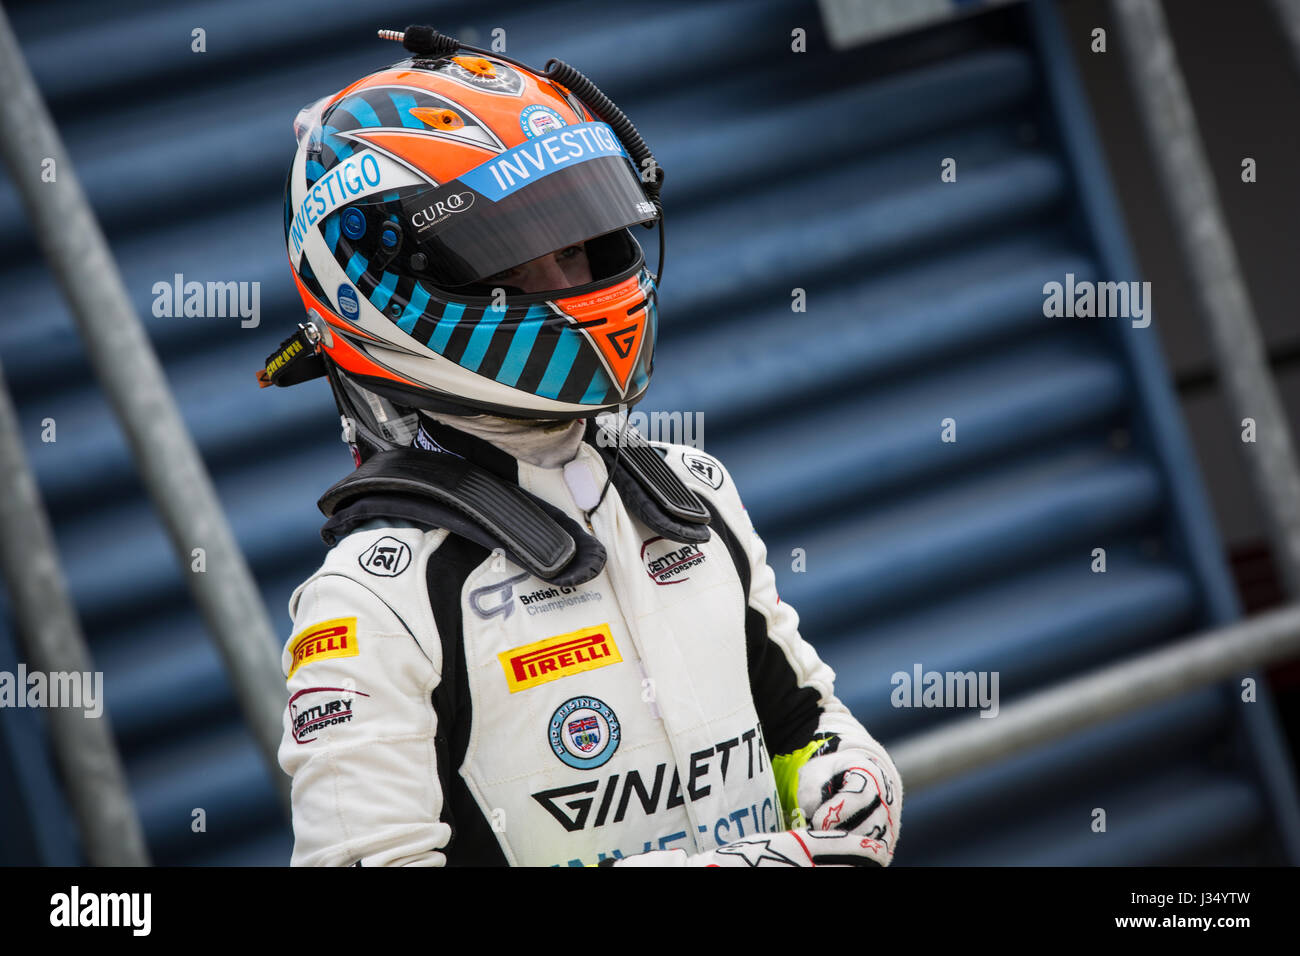 Charlie Robertson works Ginetta driver in the pit lane at Rockingham Speedway during British GT Stock Photo